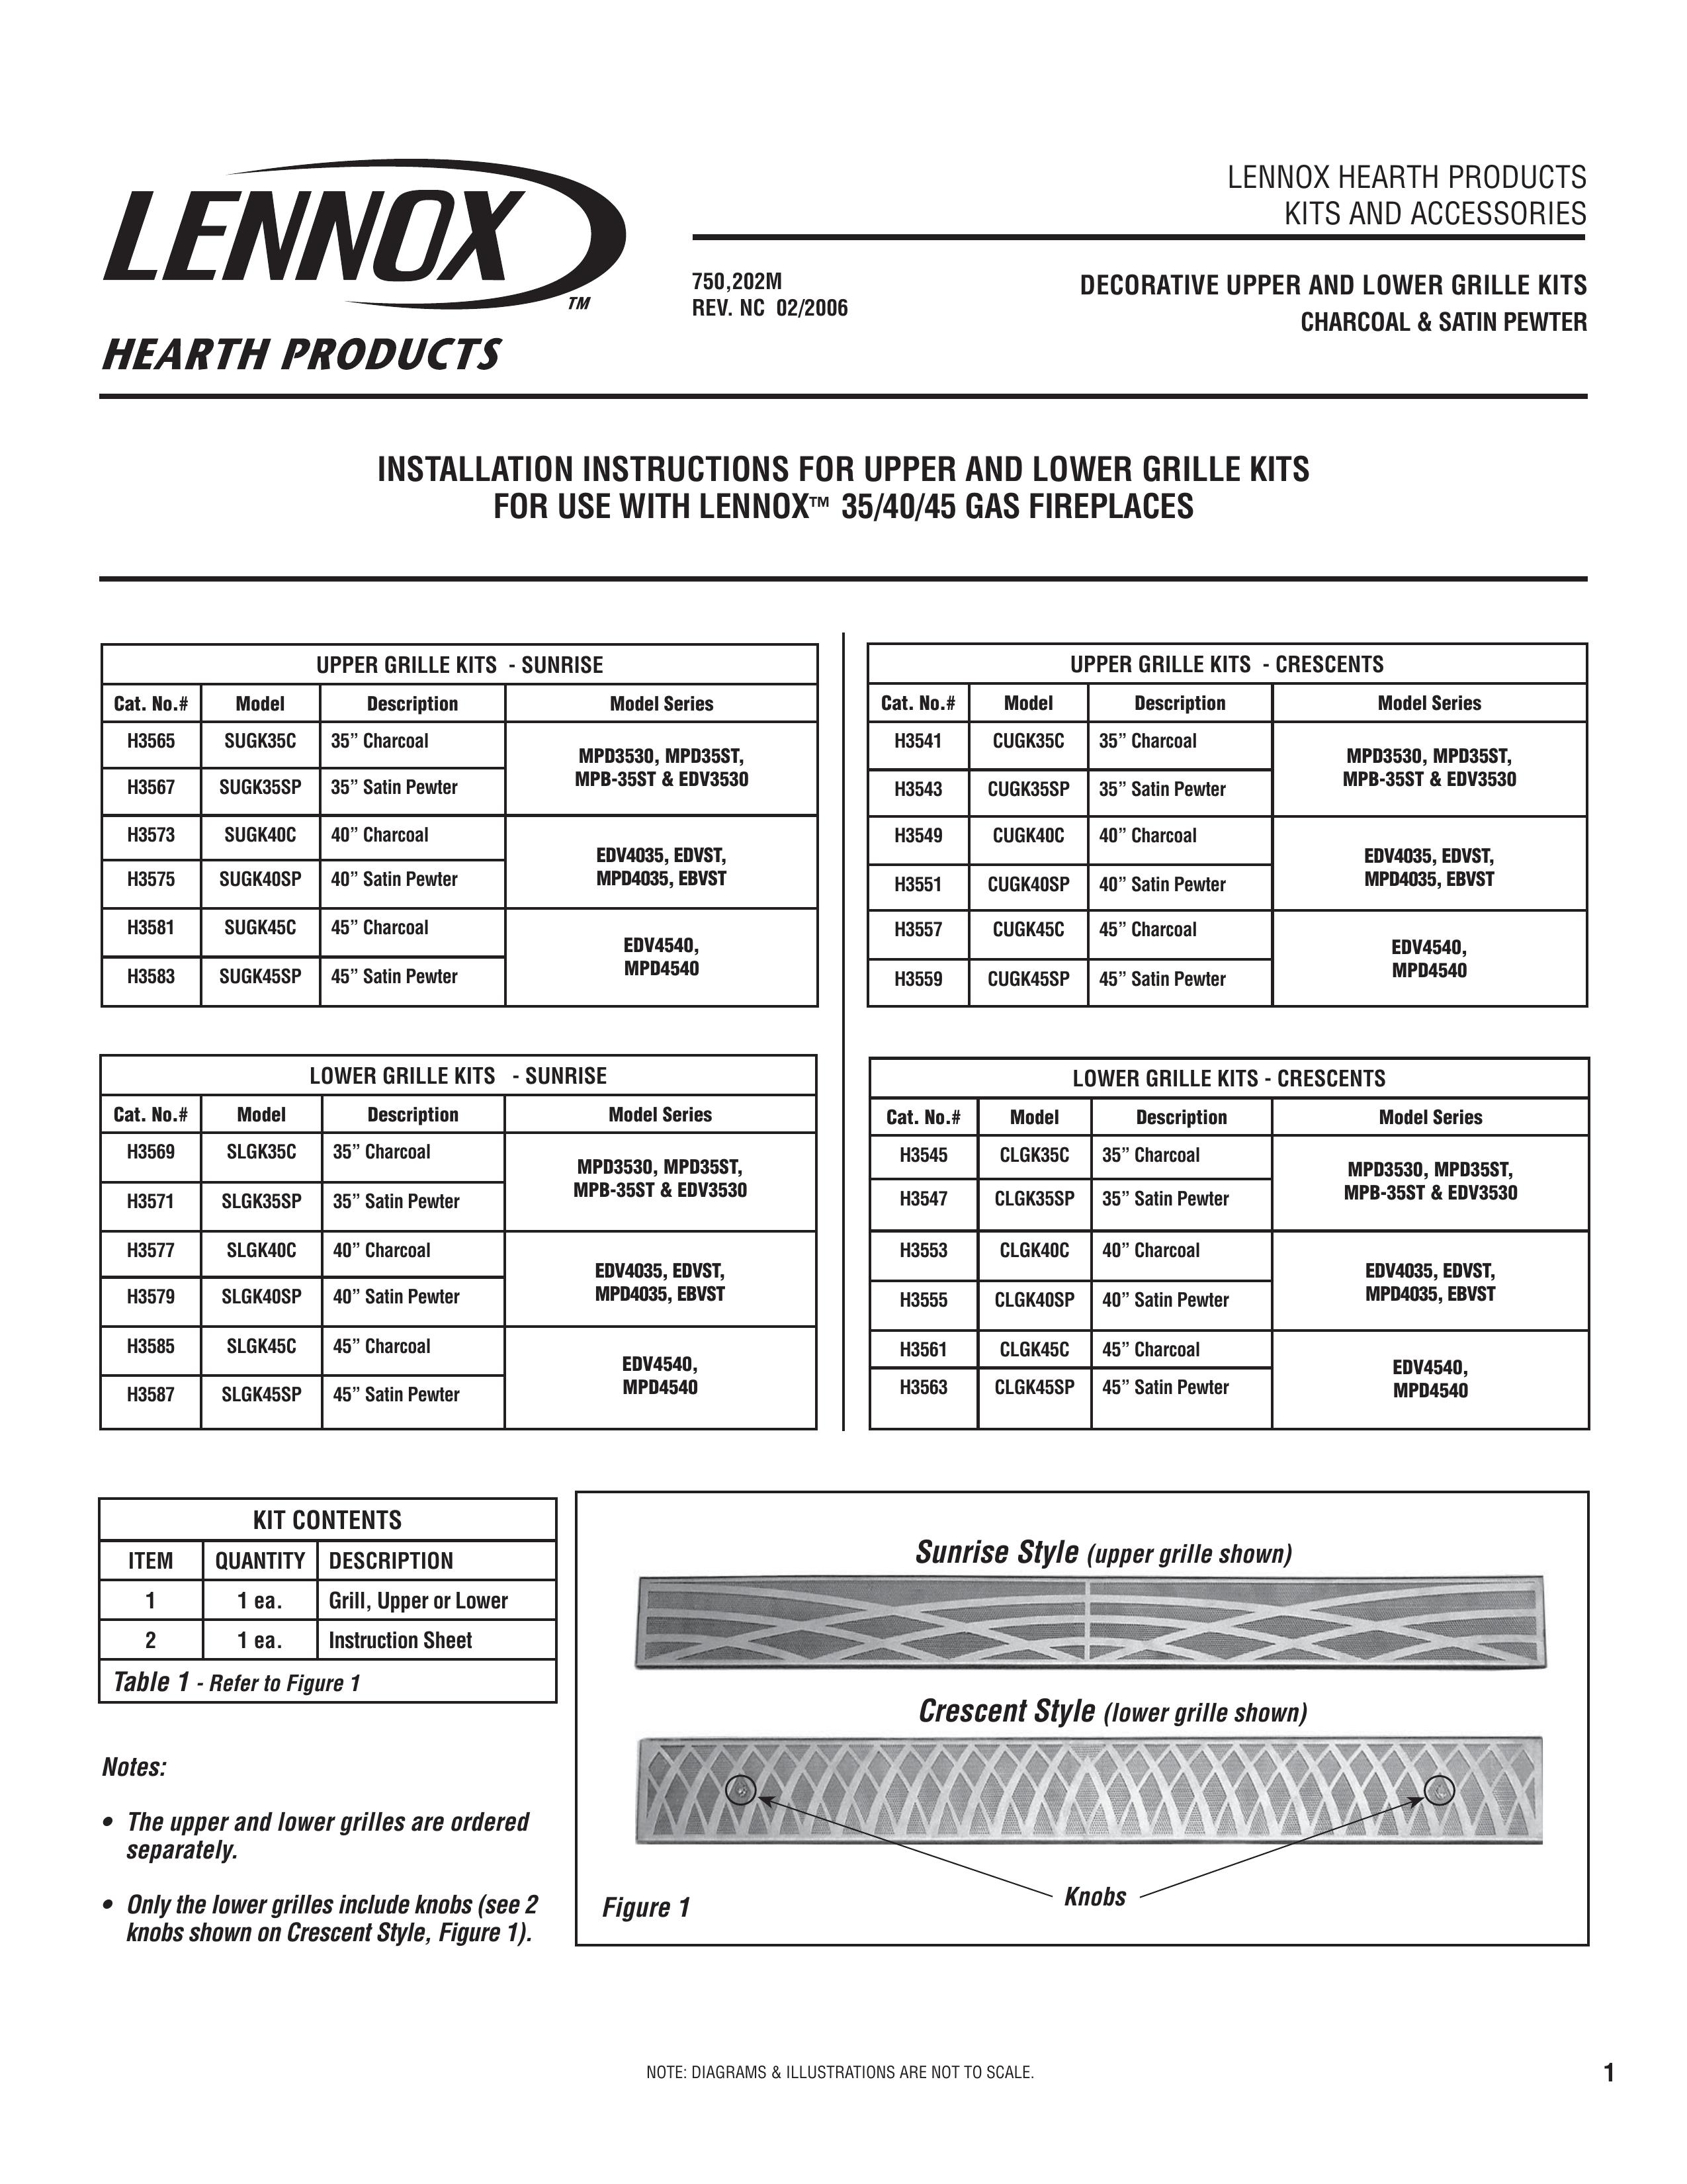 Lennox Hearth H3541 CUGK35C 35" CHARCOAL Gas Grill User Manual